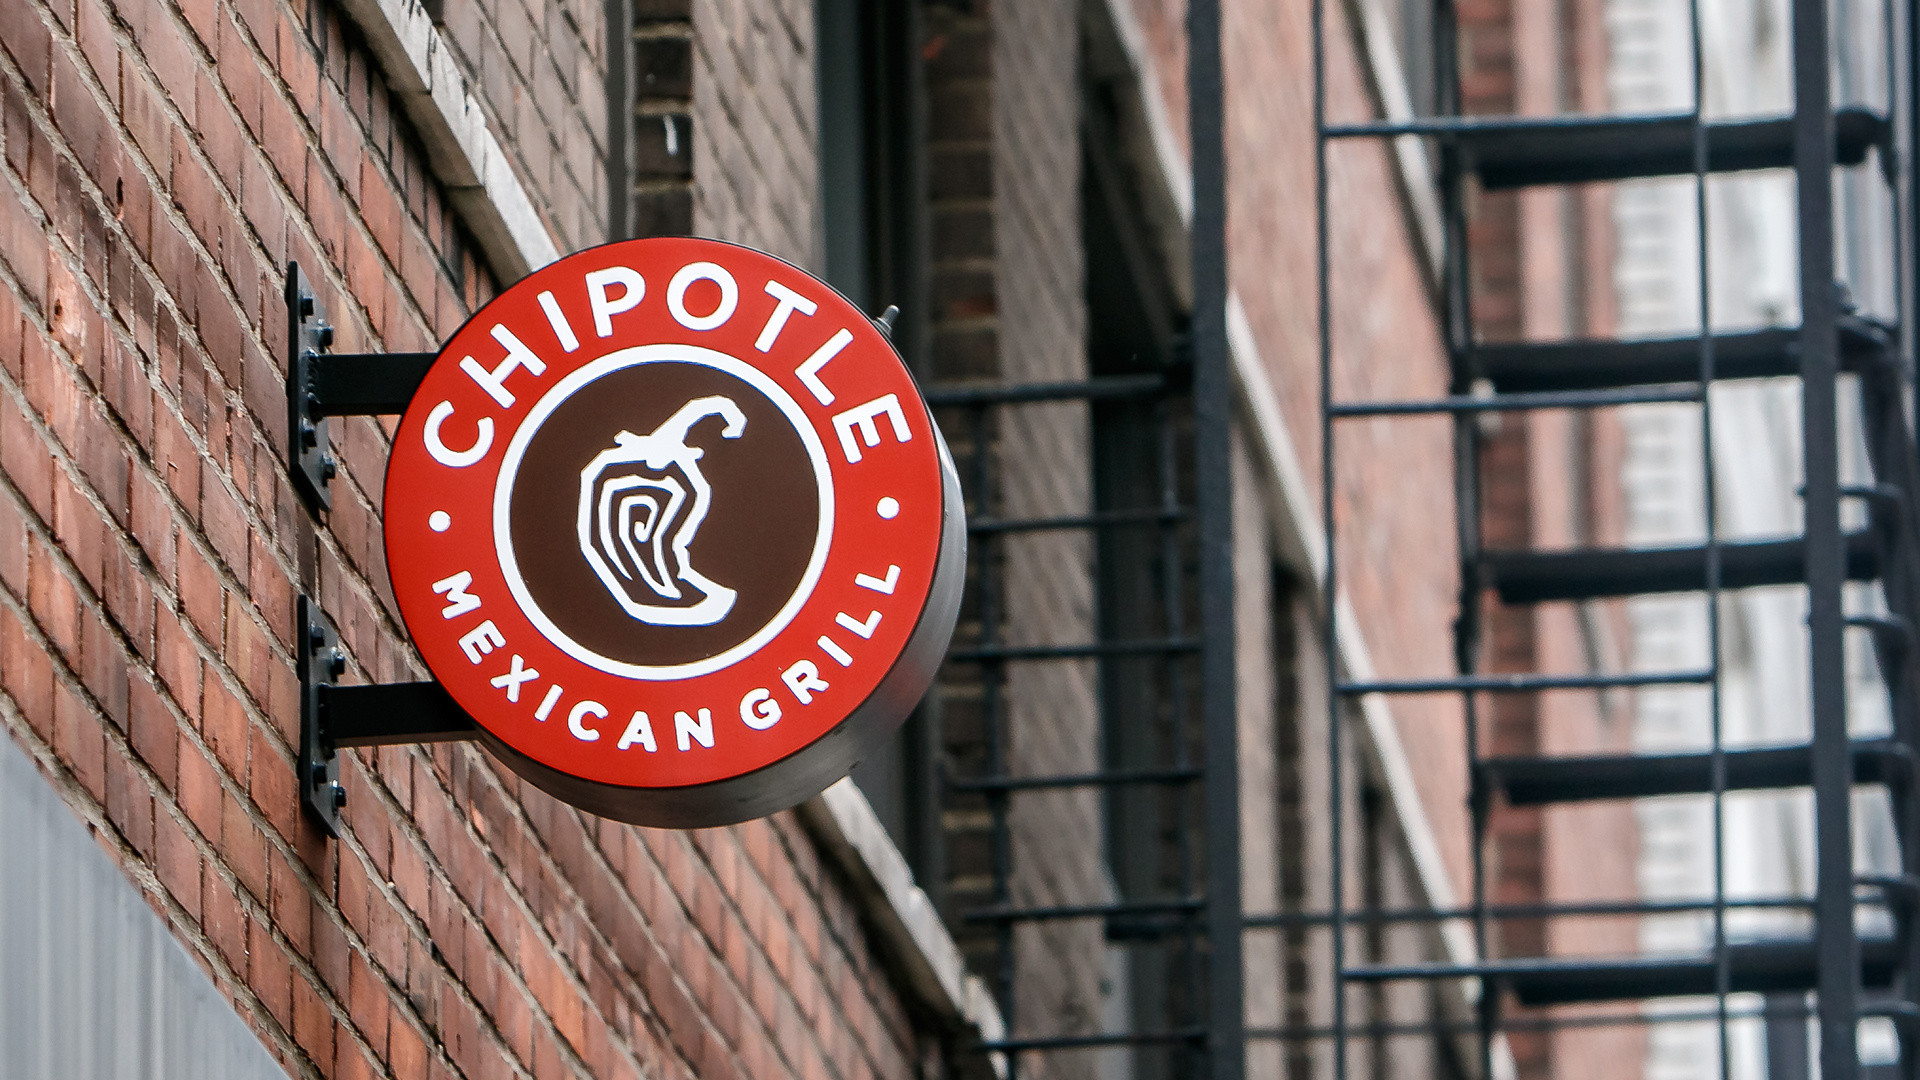 Chipotle: A restaurant chain named after the dried chili jalapeno, Fast food. 1920x1080 Full HD Wallpaper.